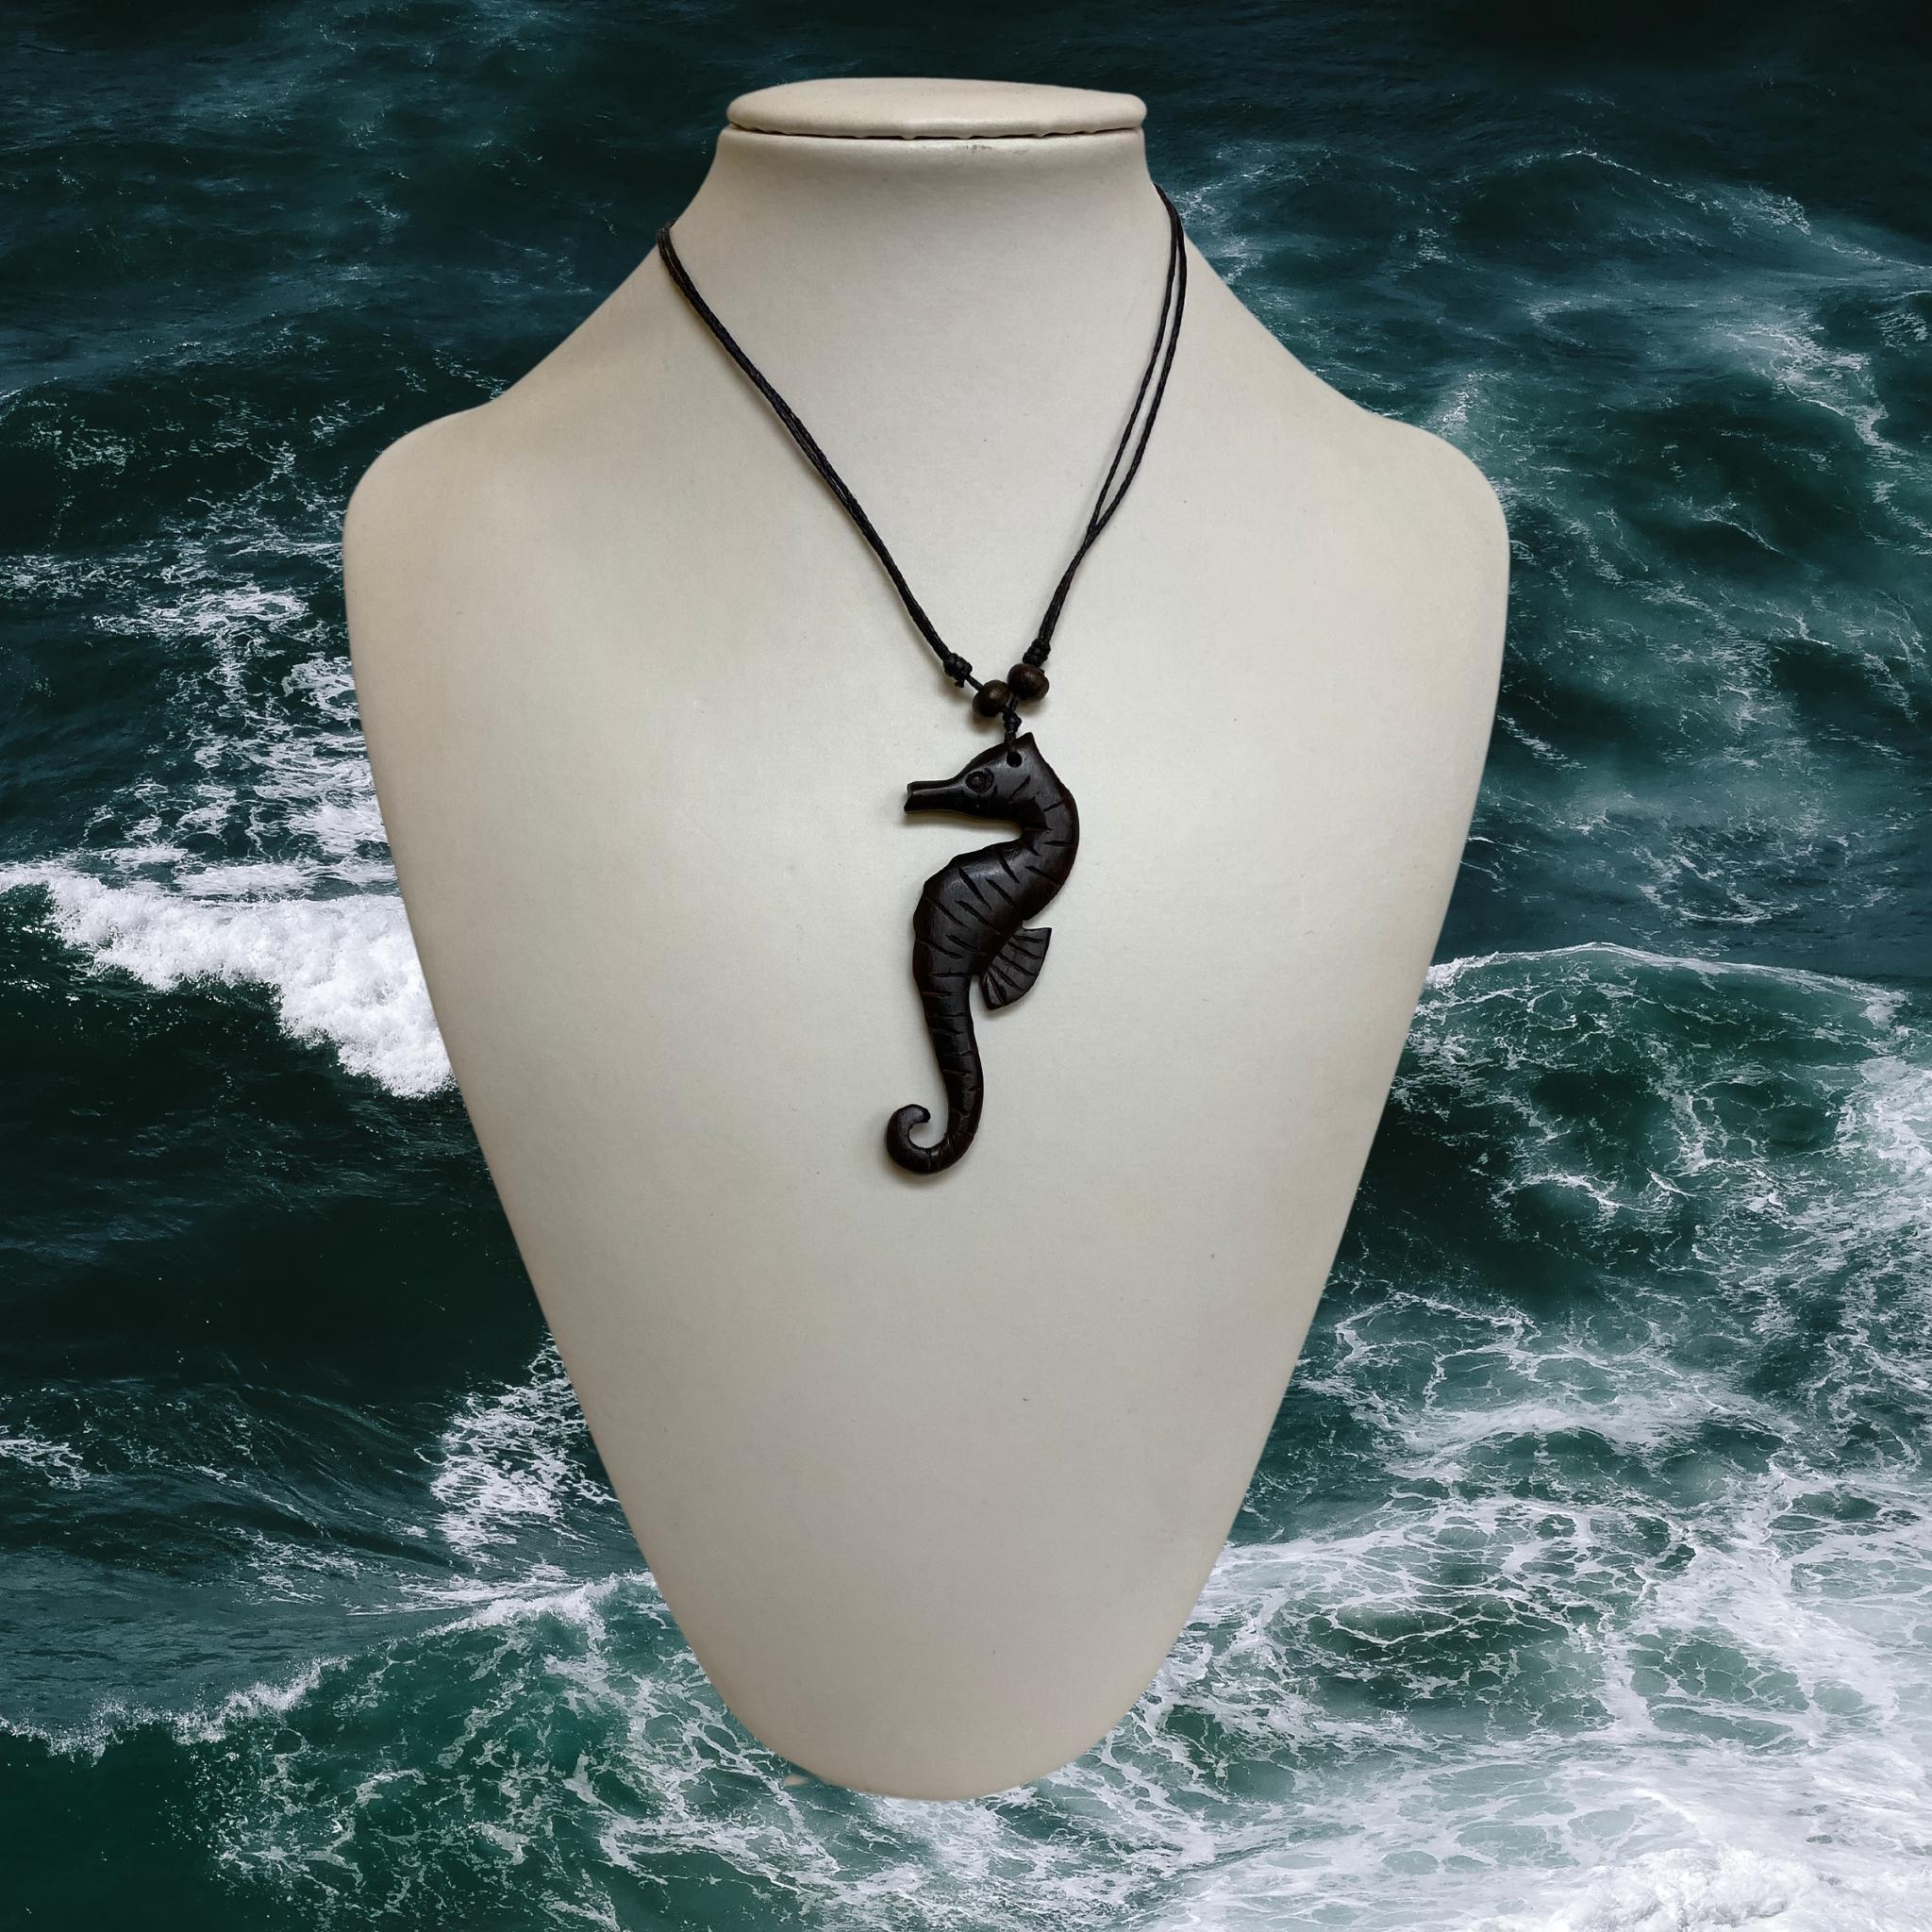 Hand carved Wooden Horse Necklace  Ironwood Sea Horse pendant Wood Necklace Sea Animal Nautical Wood Jewelry One of a Kind Gift for Him Her - Tobmarc Home Decor & Gifts 